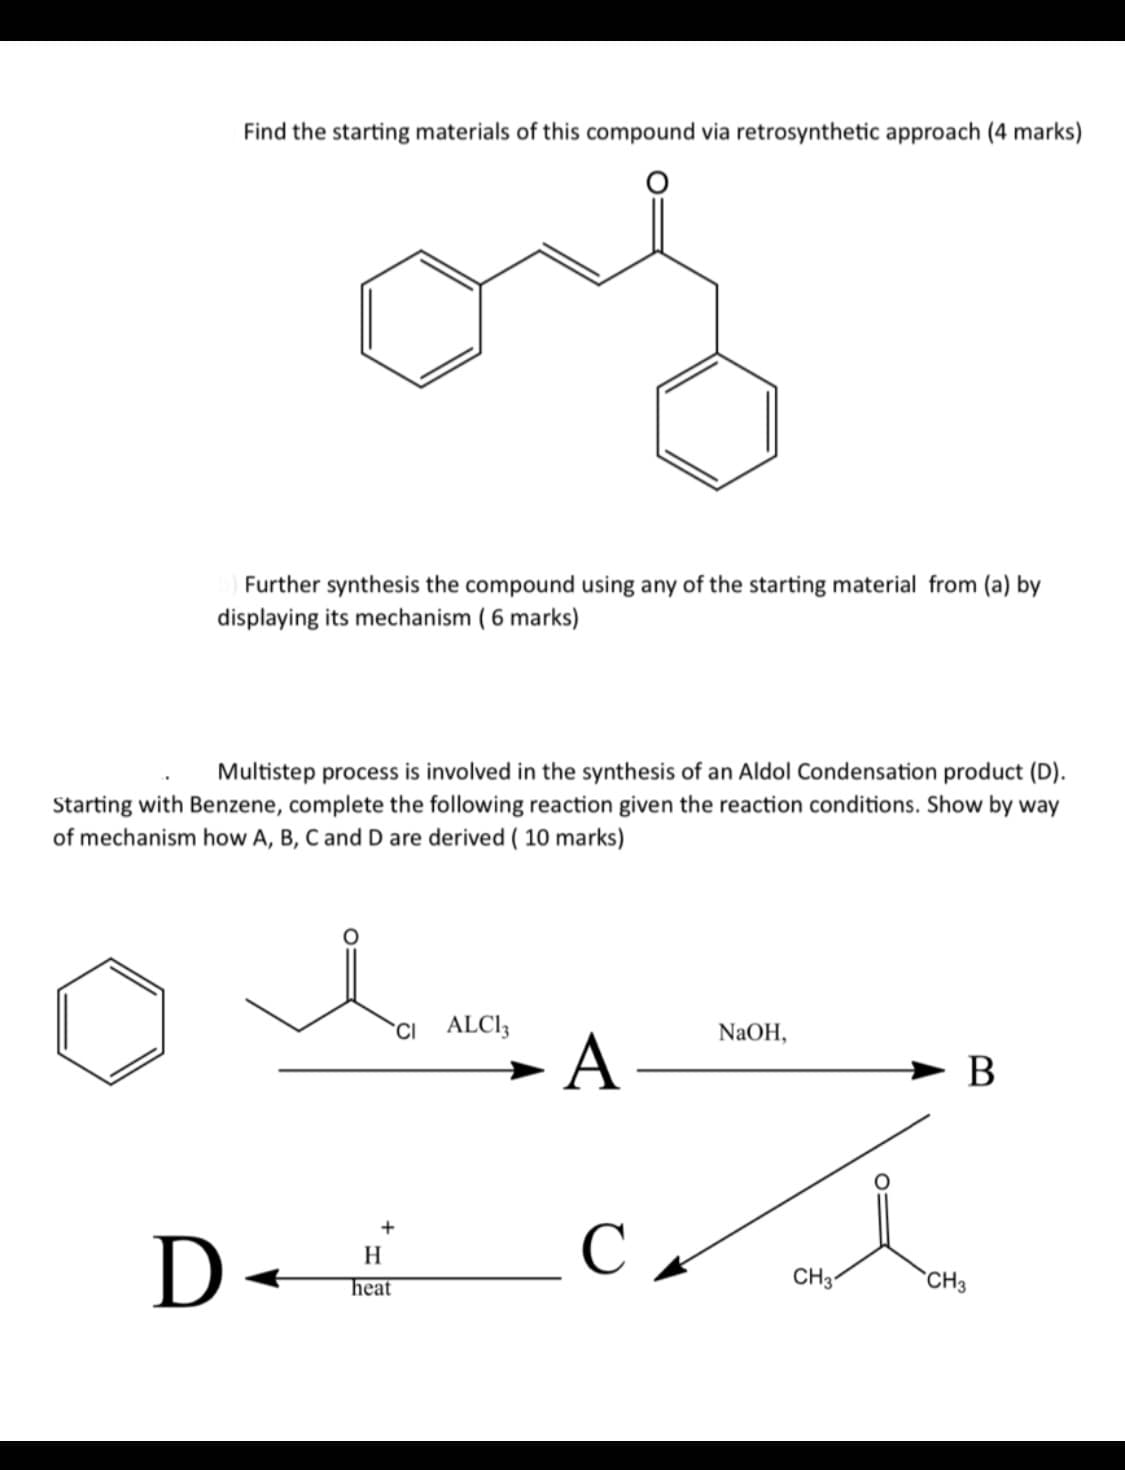 Find the starting materials of this compound via retrosynthetic approach (4 marks)
Further synthesis the compound using any of the starting material from (a) by
displaying its mechanism (6 marks)
Multistep process is involved in the synthesis of an Aldol Condensation product (D).
Starting with Benzene, complete the following reaction given the reaction conditions. Show by way
of mechanism how A, B, C and D are derived (10 marks)
i
H
D =
.
heat
CI
ALC13
A-
NaOH,
B
+
C A
CH31
CH3